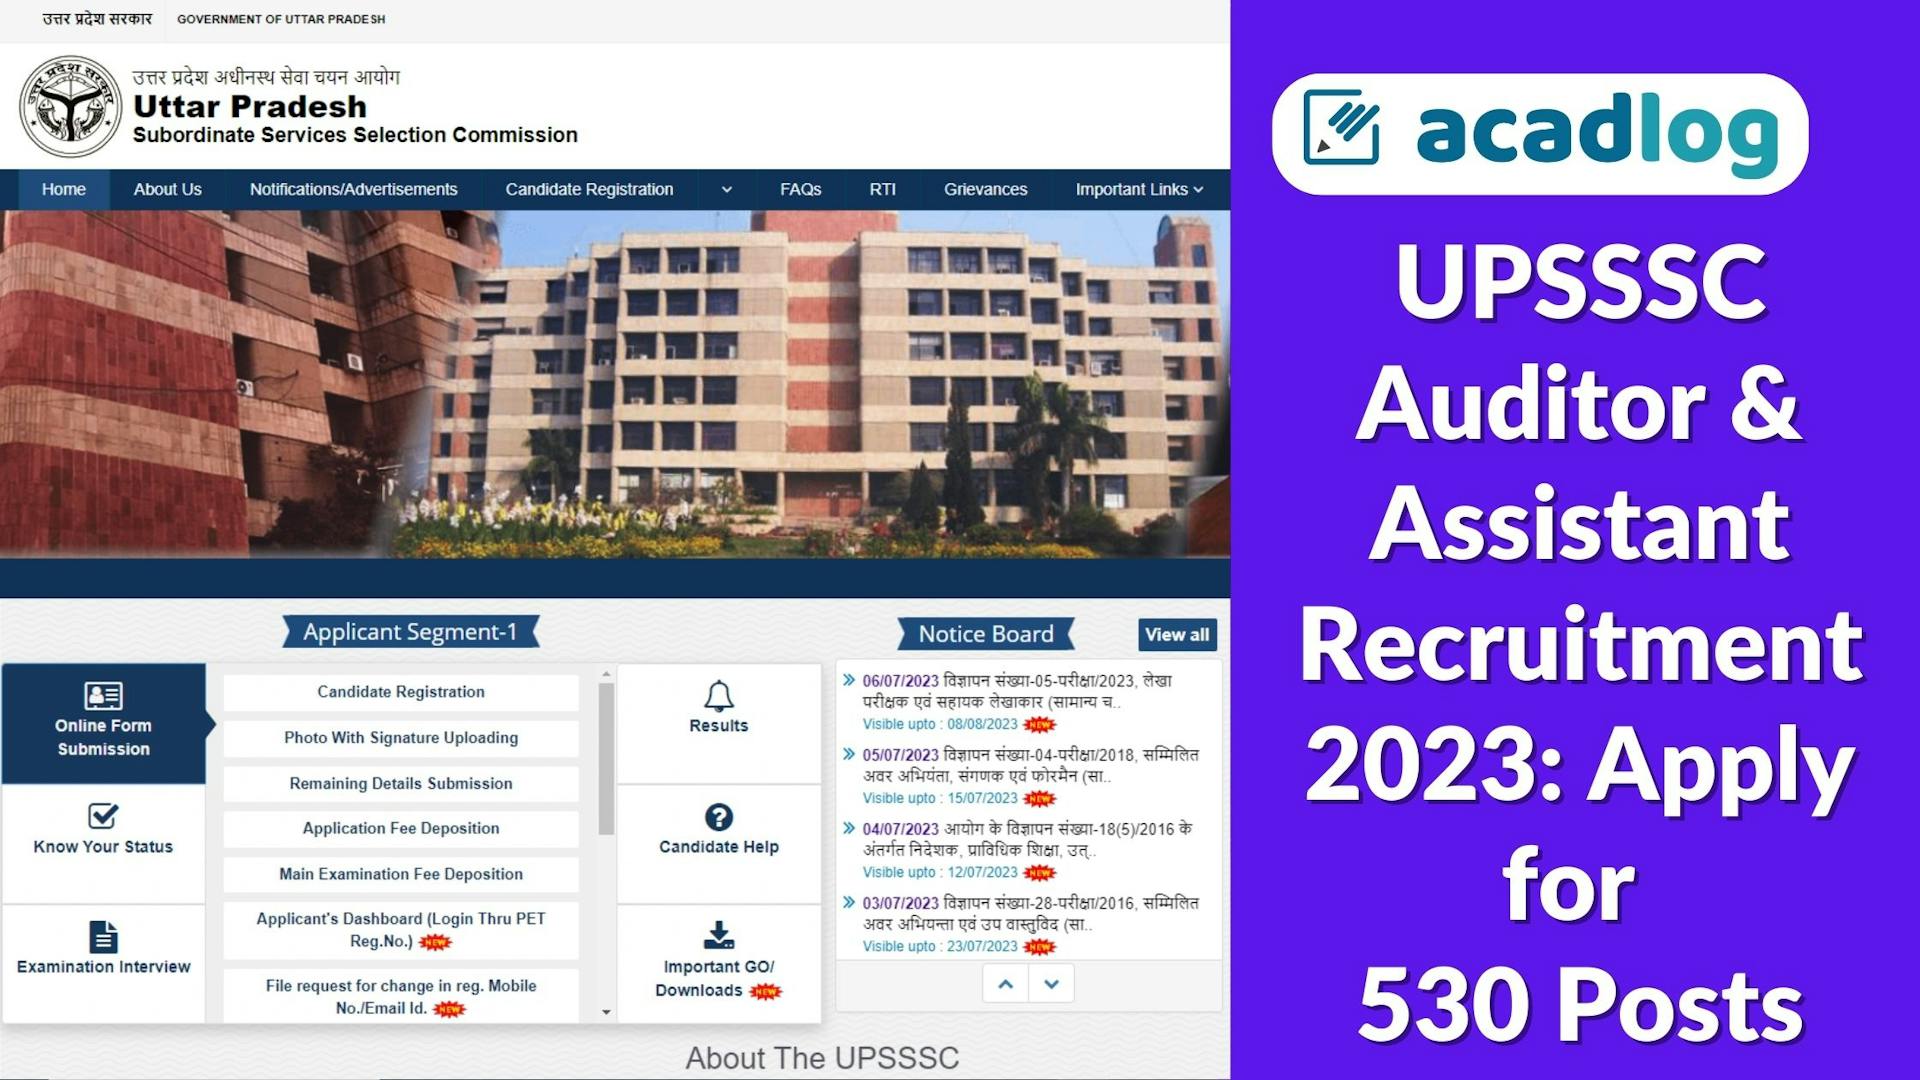 UPSSSC Auditor & Assistant Recruitment 2023: Apply for 530 Posts